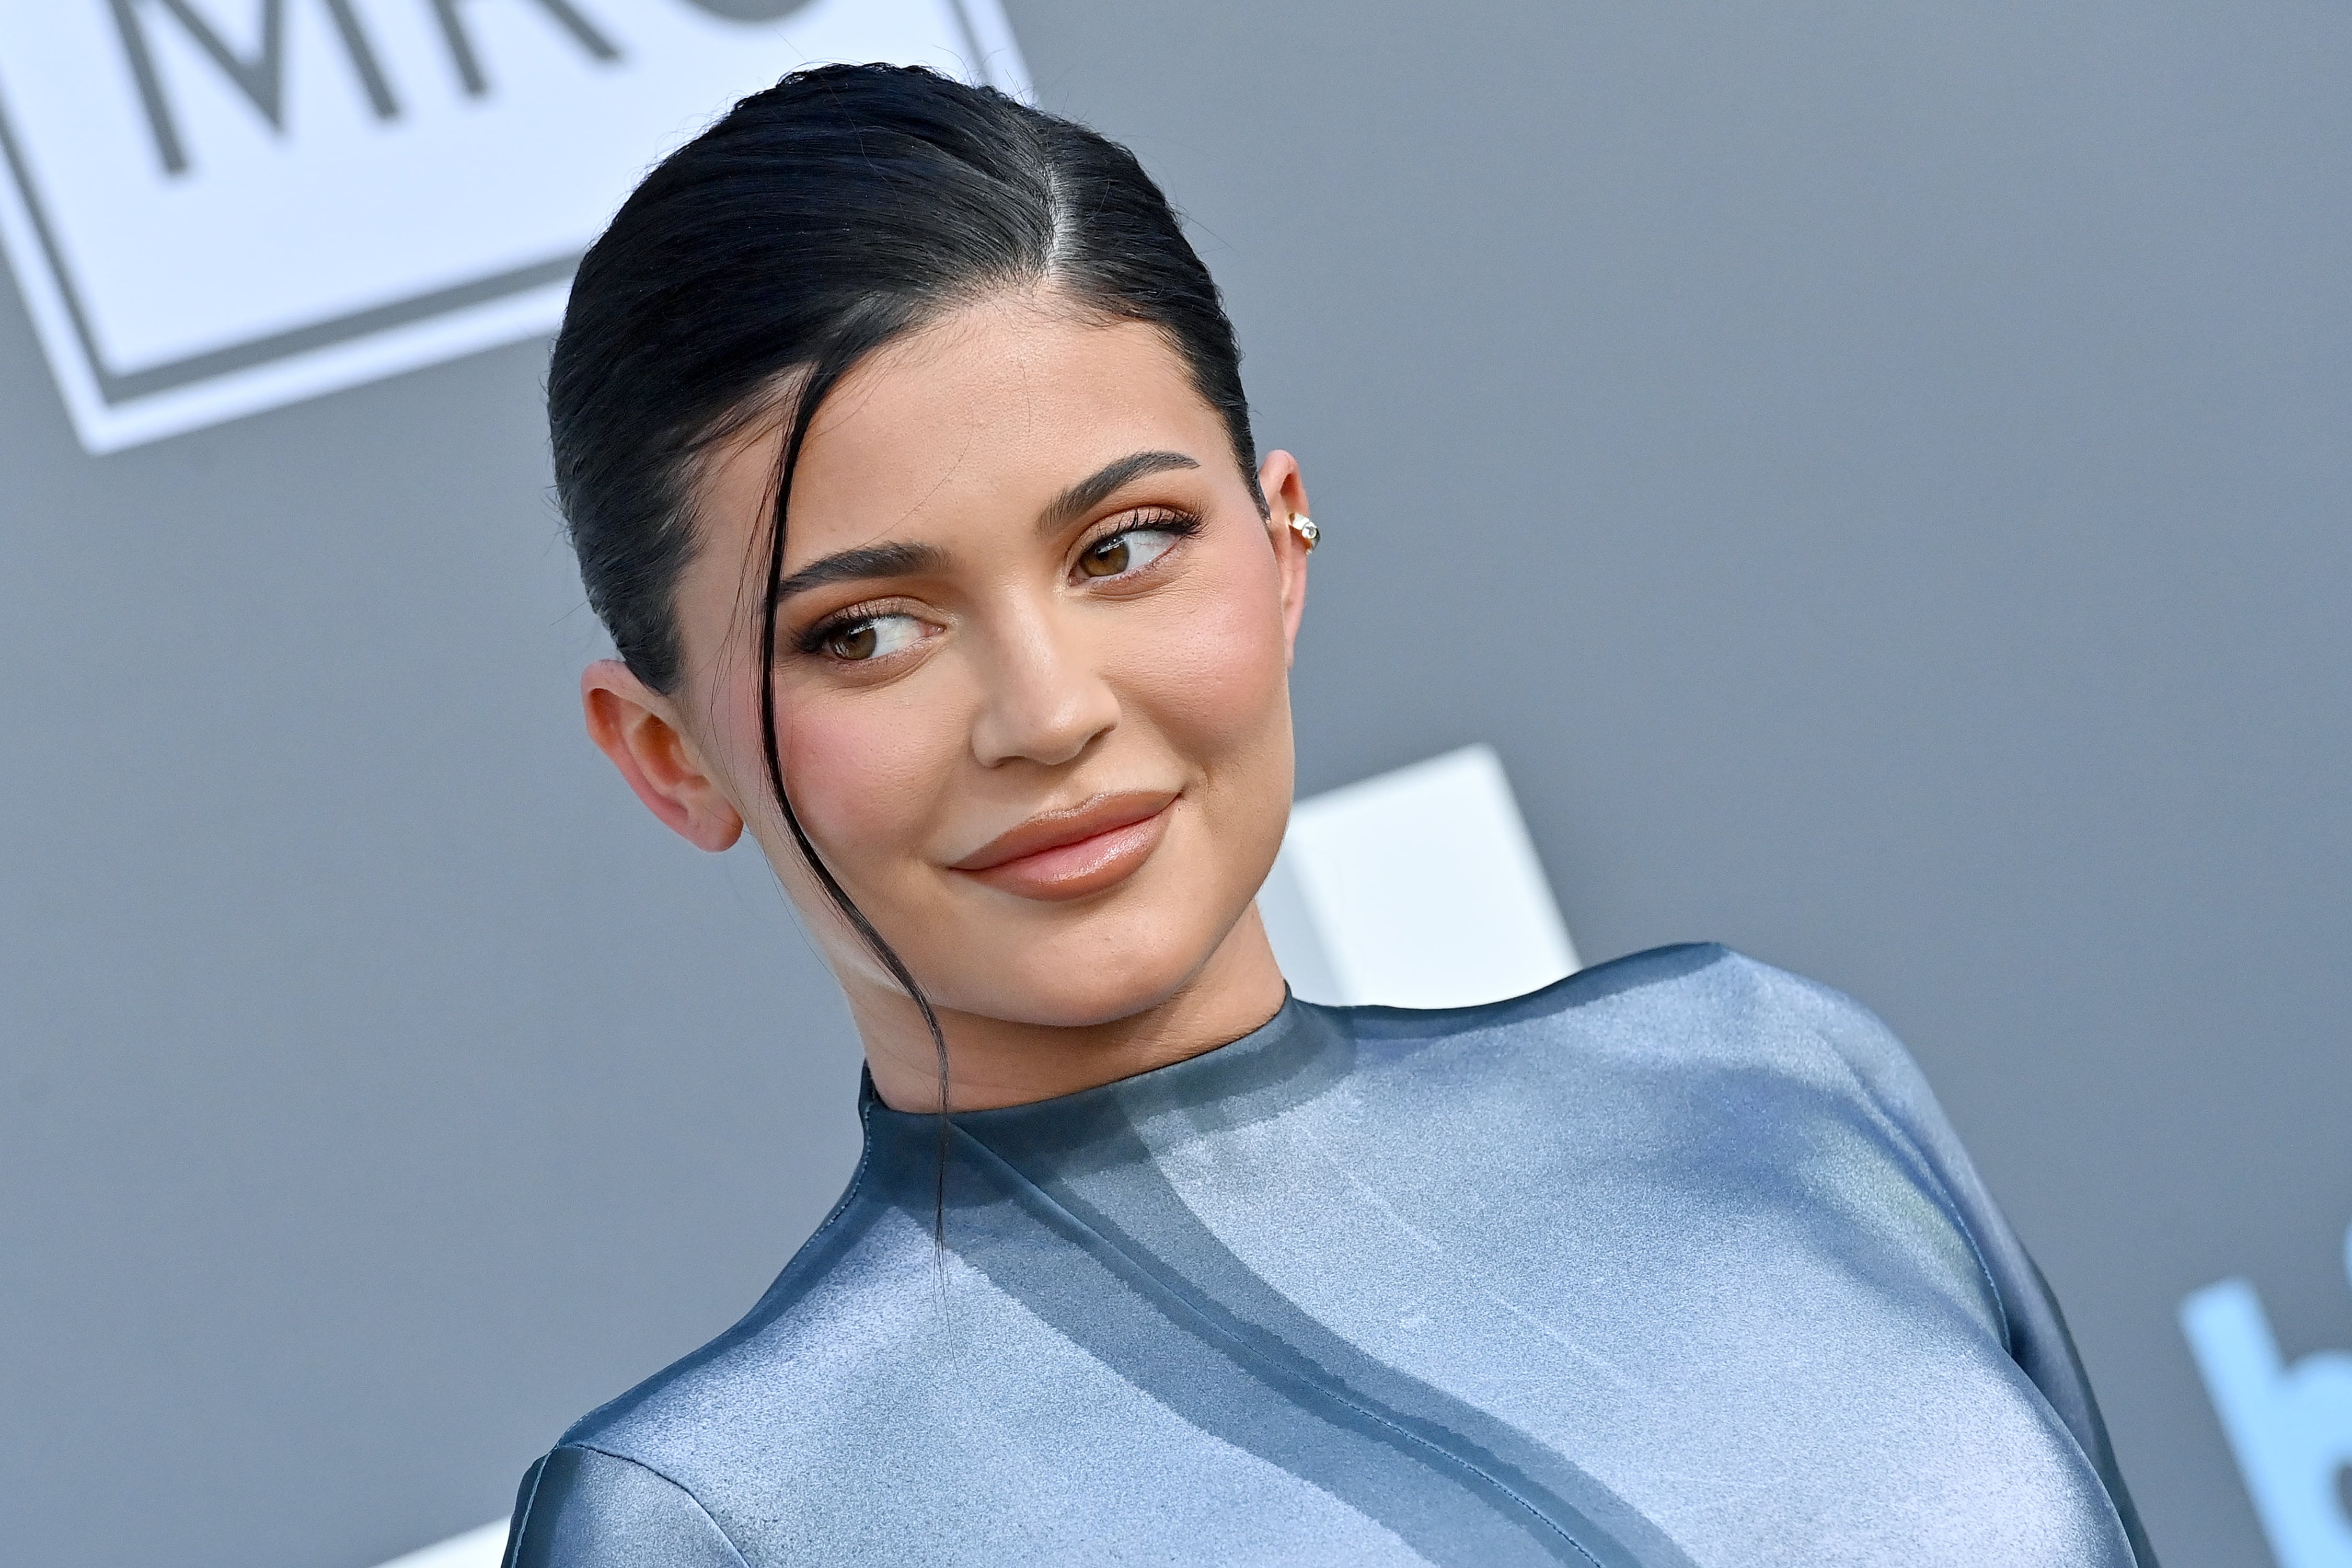 Kylie Jenner Legally Changes Son Aire’s Name 5 Months After Revealing It to the World